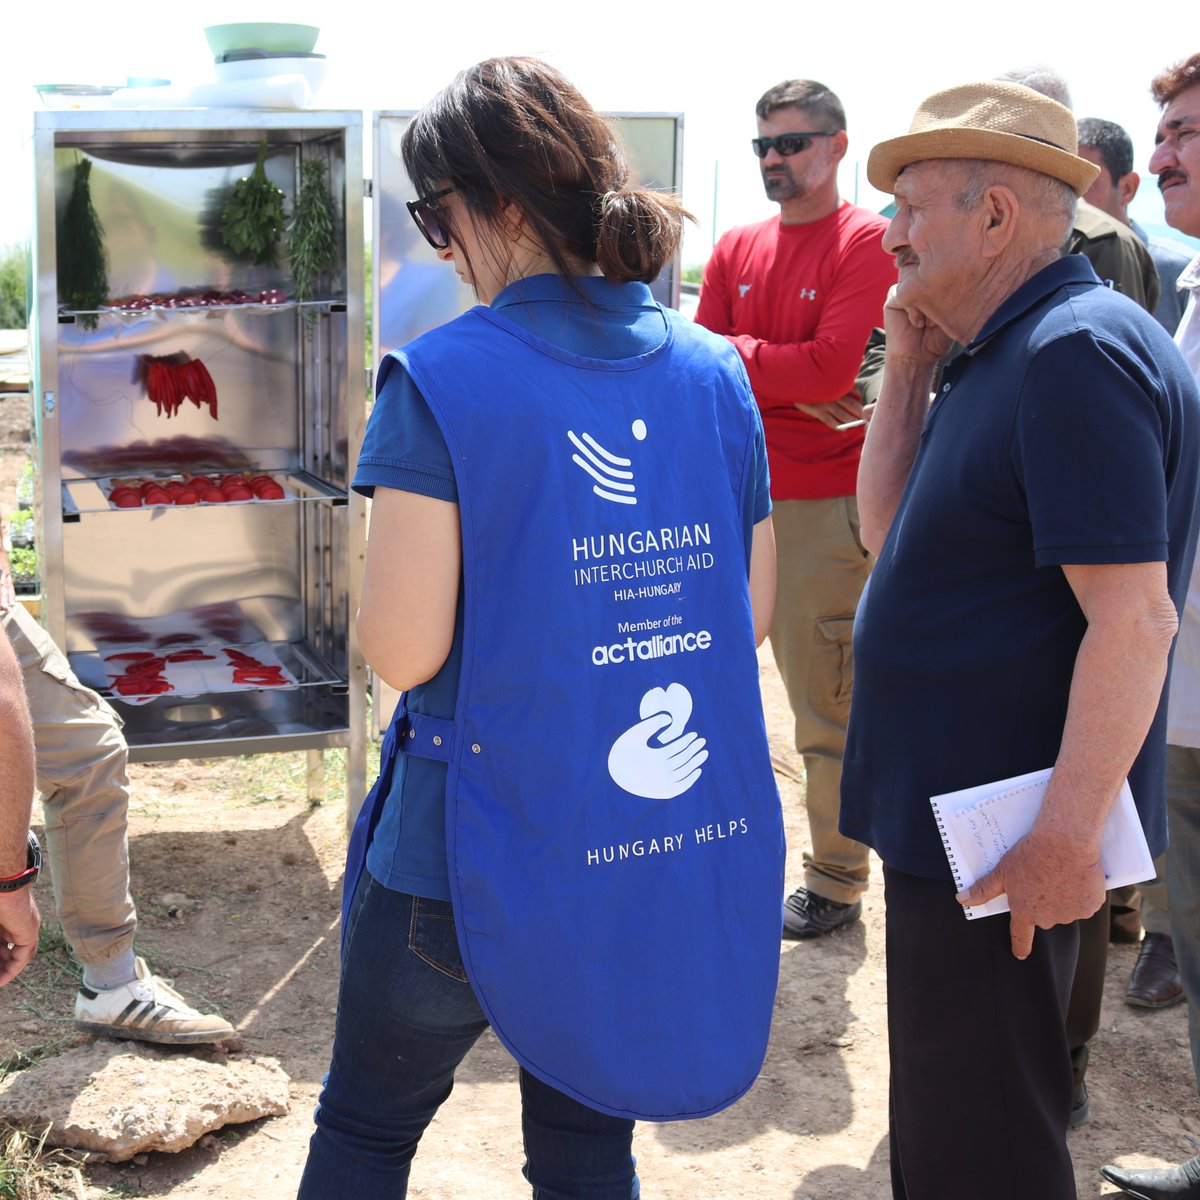 🇮🇶Drying, pickling, fermentation & cheesemaking - the agricultural courses on our demonstration farm in Alqosh, Iraq continue. 15 local farmers completed 5 days of training on food processing & preservation, enabling them to add further value to their produce with these practices